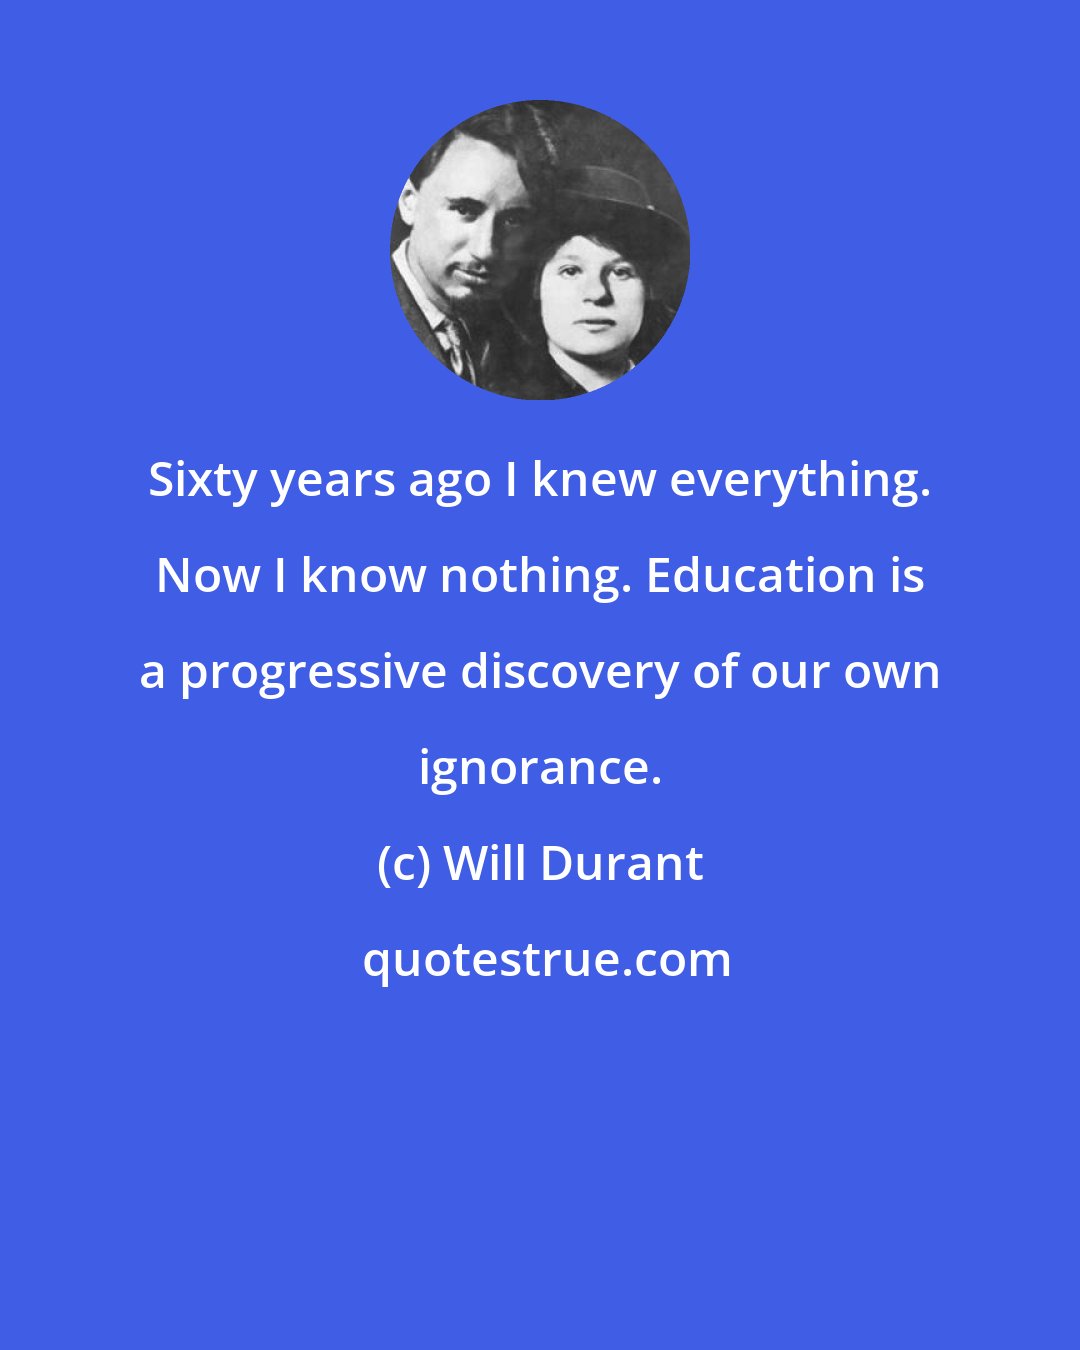 Will Durant: Sixty years ago I knew everything. Now I know nothing. Education is a progressive discovery of our own ignorance.